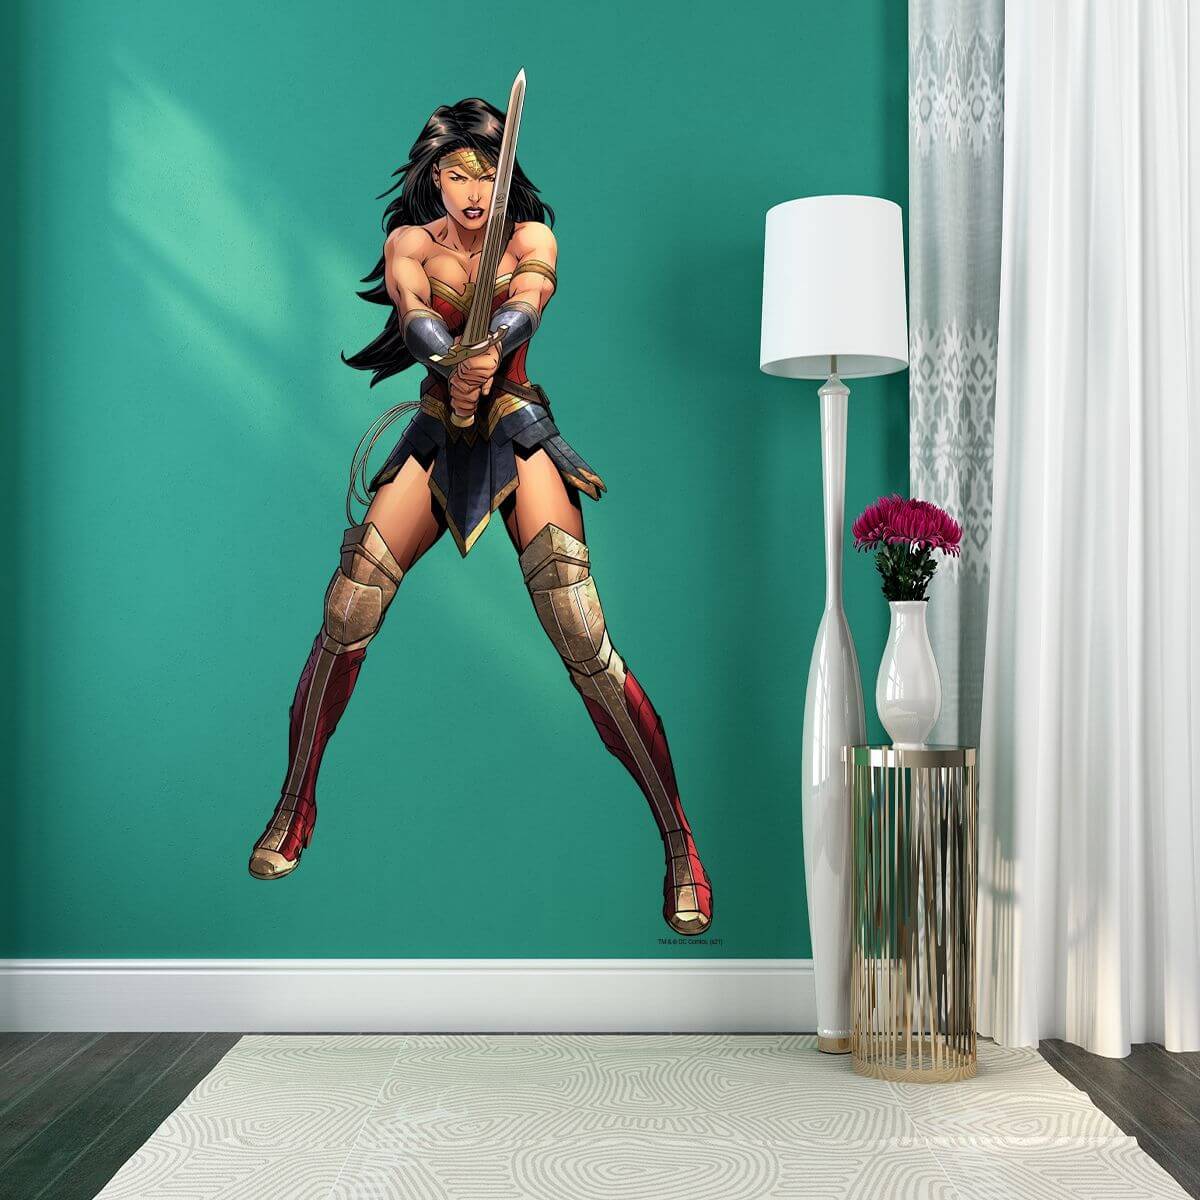 Kismet Decals Wonder Woman Fearless Licensed Wall Sticker - Easy DIY Justice League Home & Room Decor Wall Art - Kismet Decals